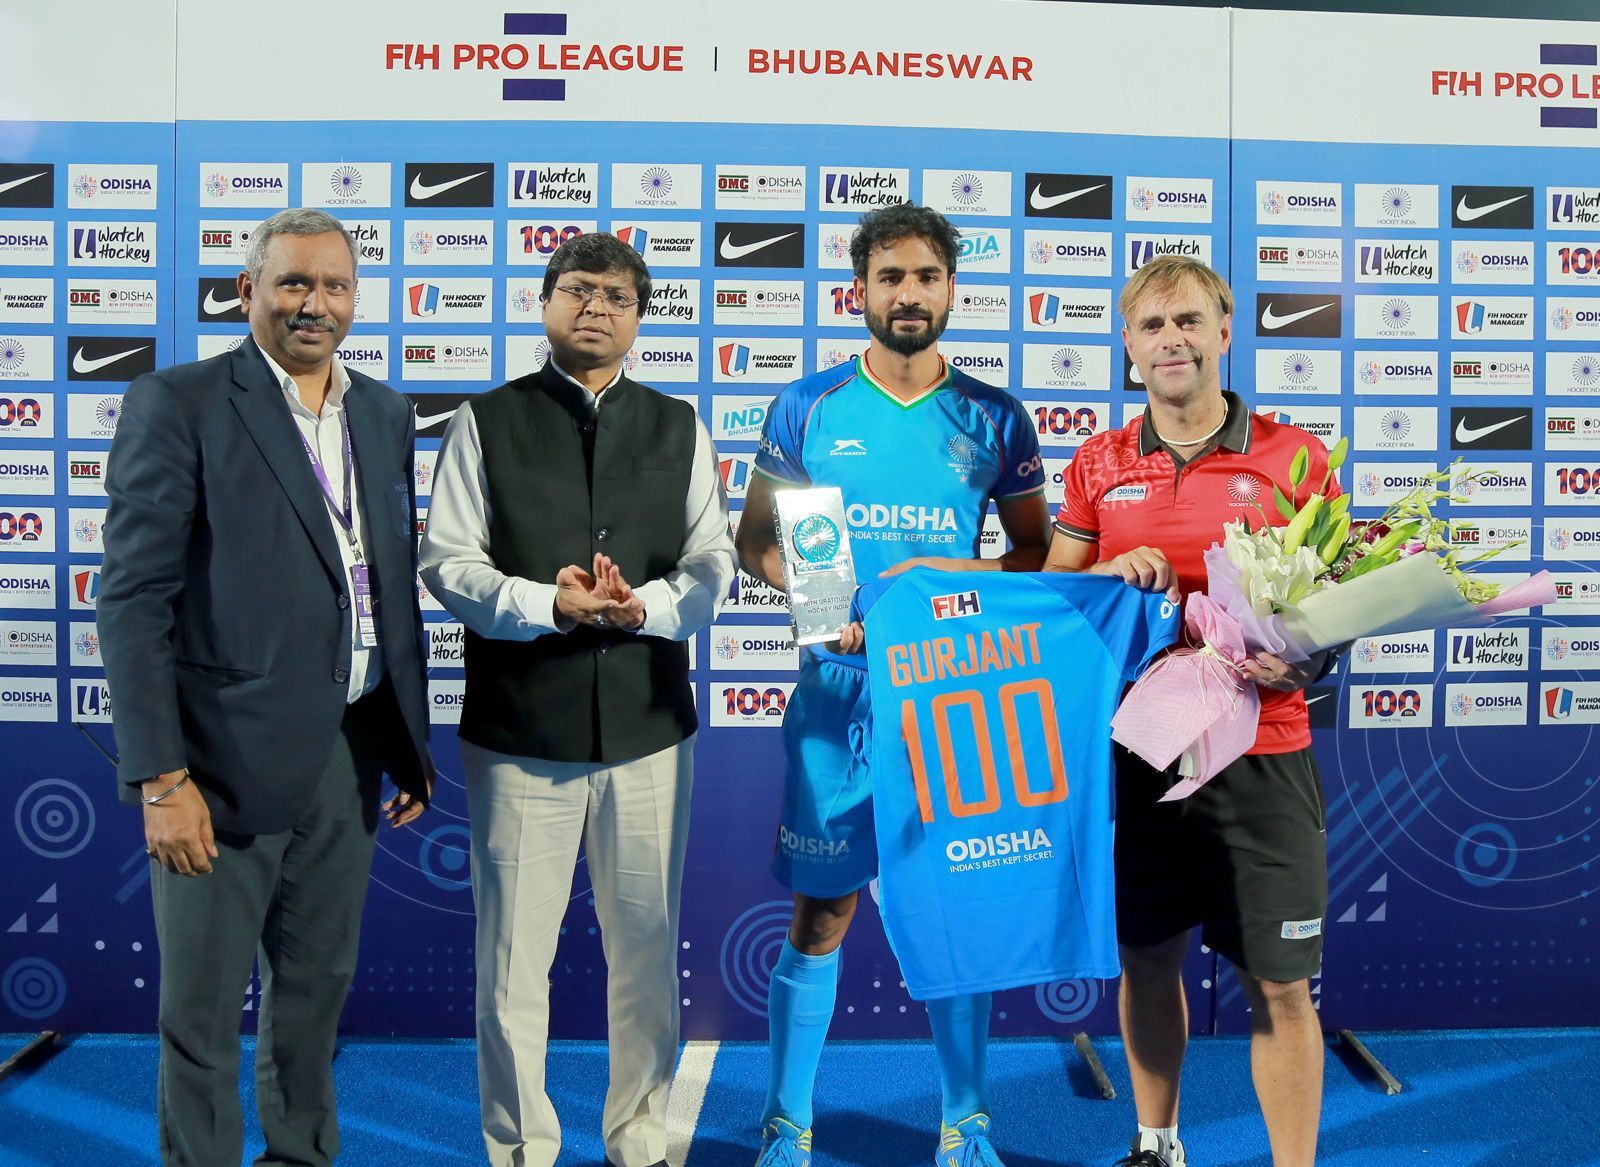 Gurjant Singh being felicitated by Hockey India for playing 100 international matches